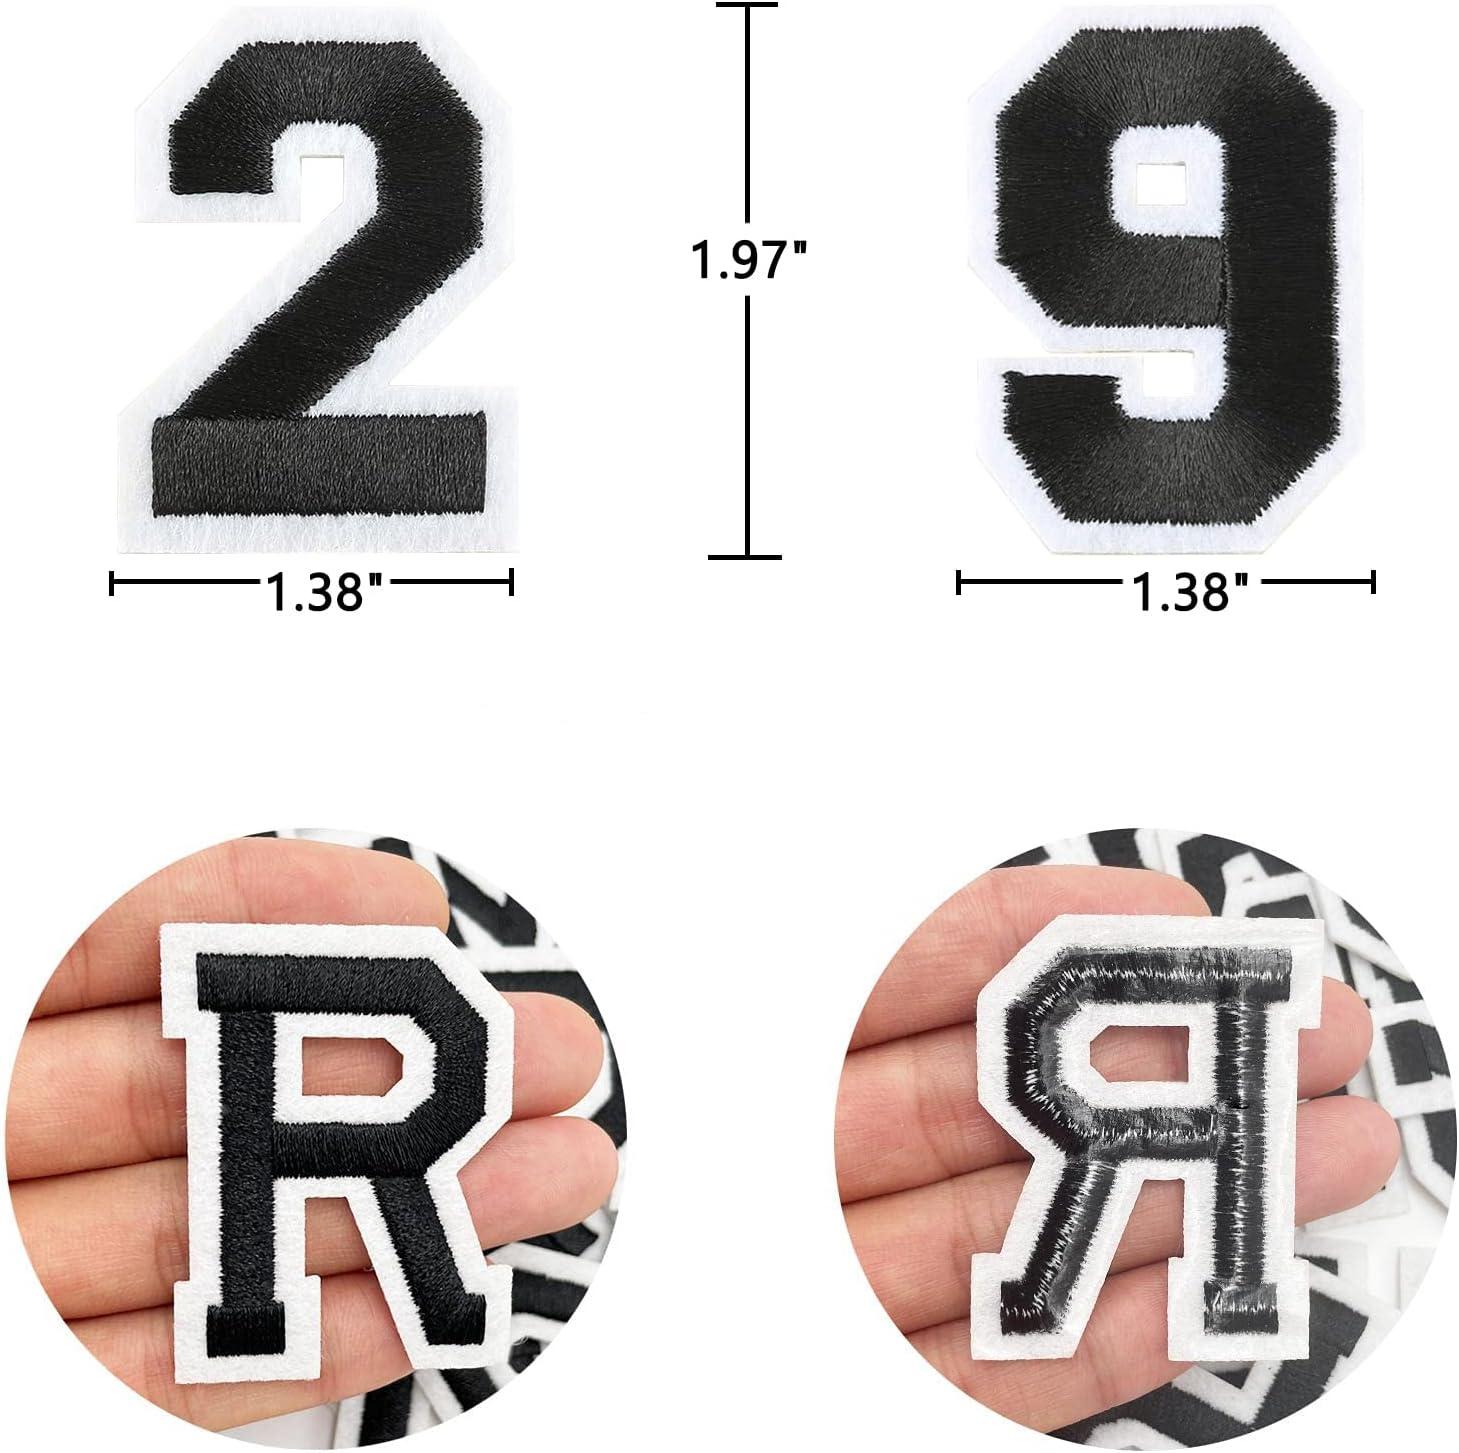 10 PCS Number Chenille Patches Iron On Sewing Applique Patches for Clothes  Decorate Embroidered Chenille Number Patches 1.97'' Varsity Fuzzy Repair  Patch for Jeans Jackets Shirts Hats Bags Black Black Number